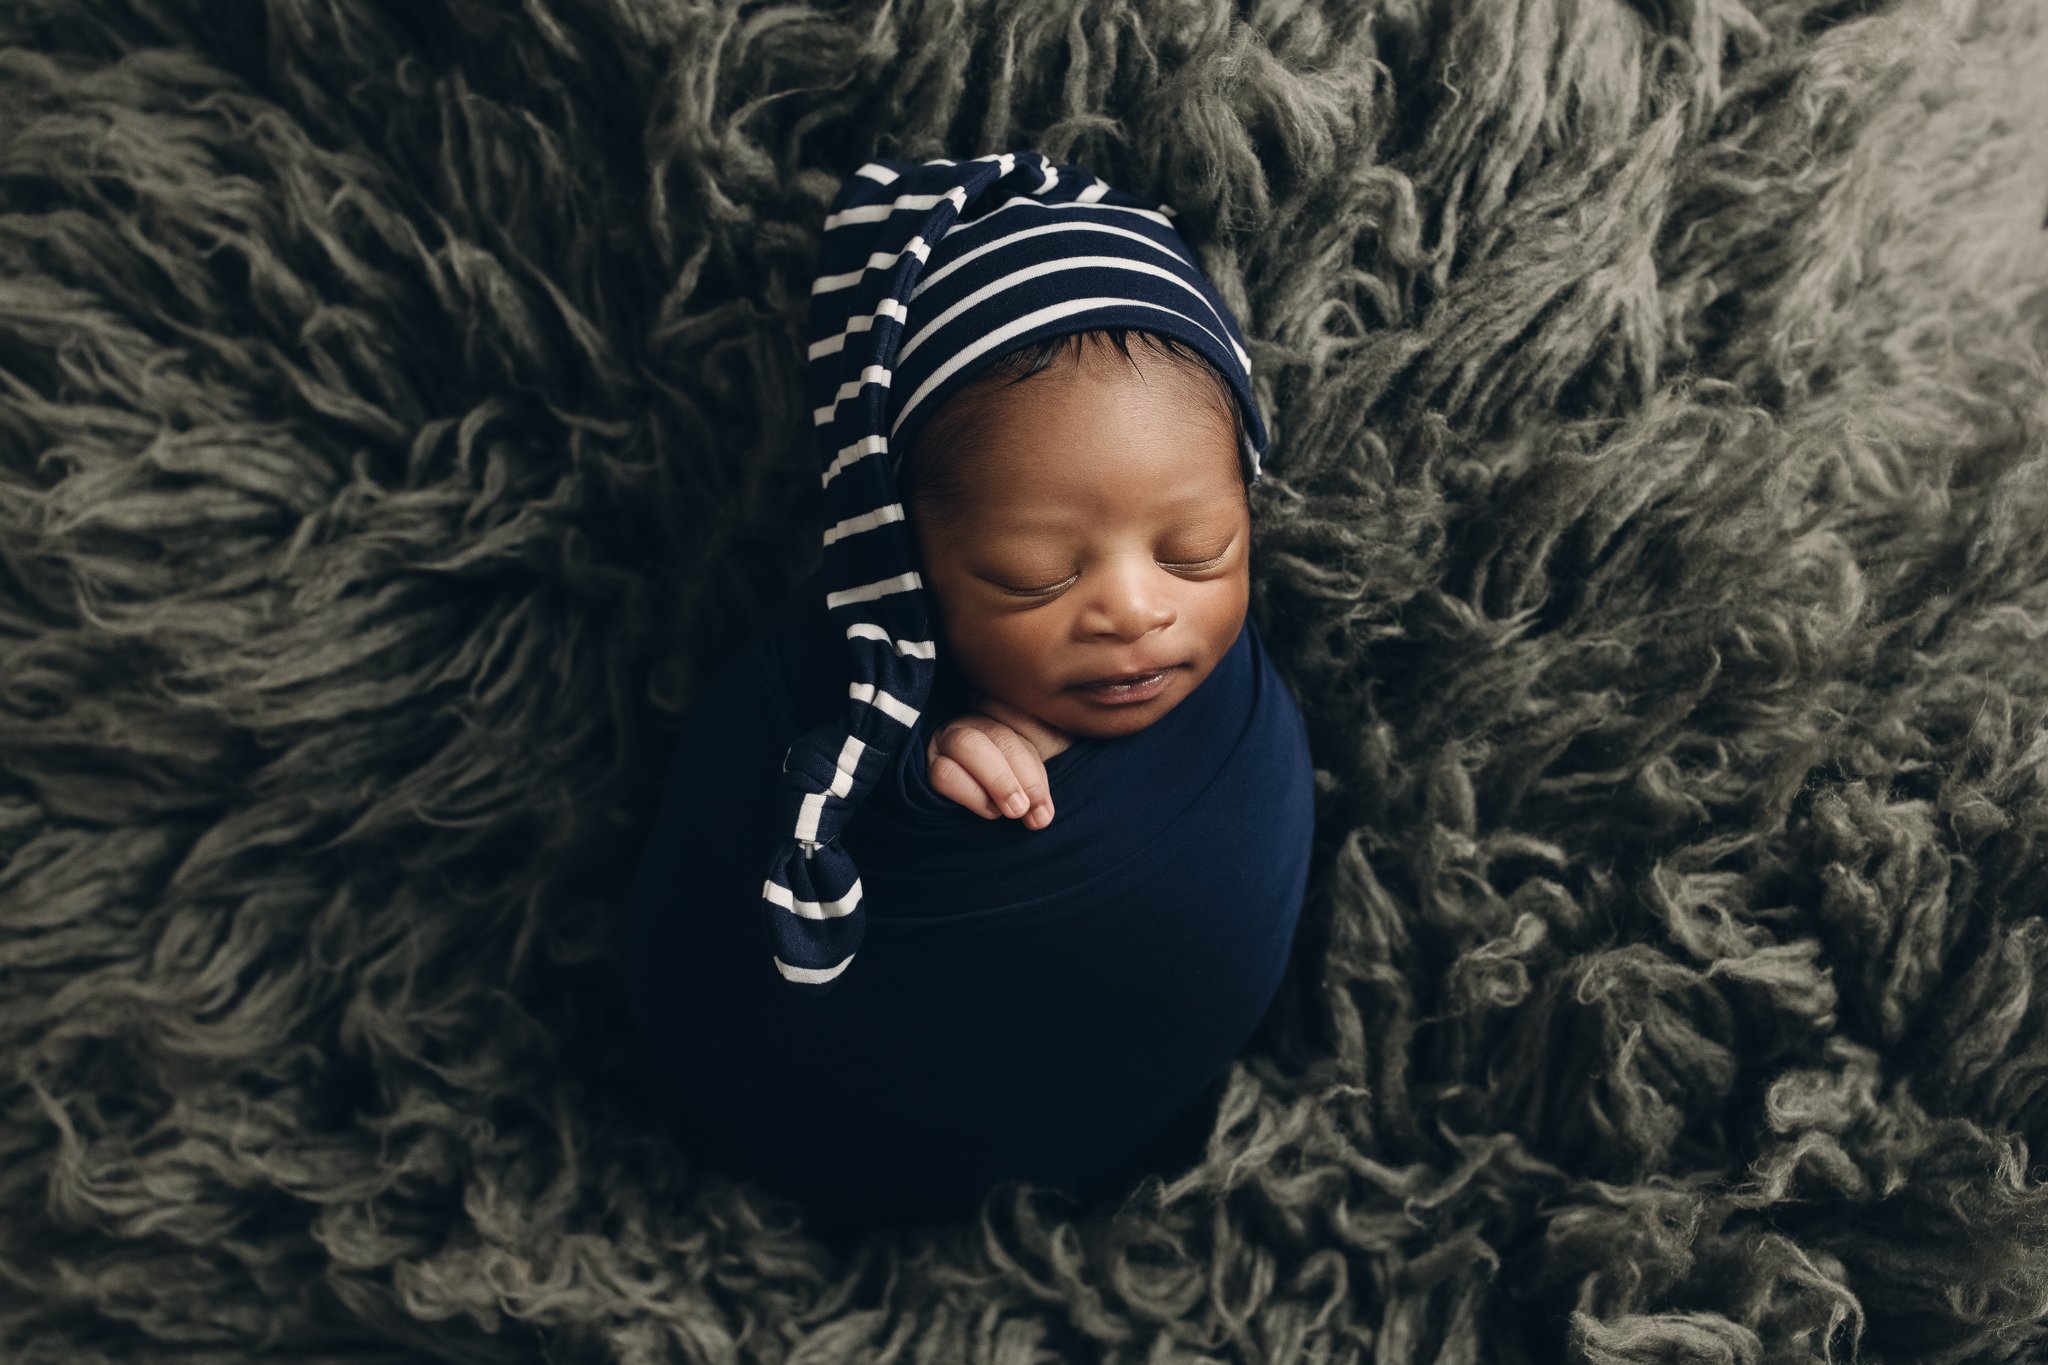 Posed_Studio_Newborn_Photographer_Second_Child_Siblings_Baby_Boy_Navy_Mustard_by_Christie_Leigh_Photo_Champion_OH_Ohio_Trumbull_County-4.jpg